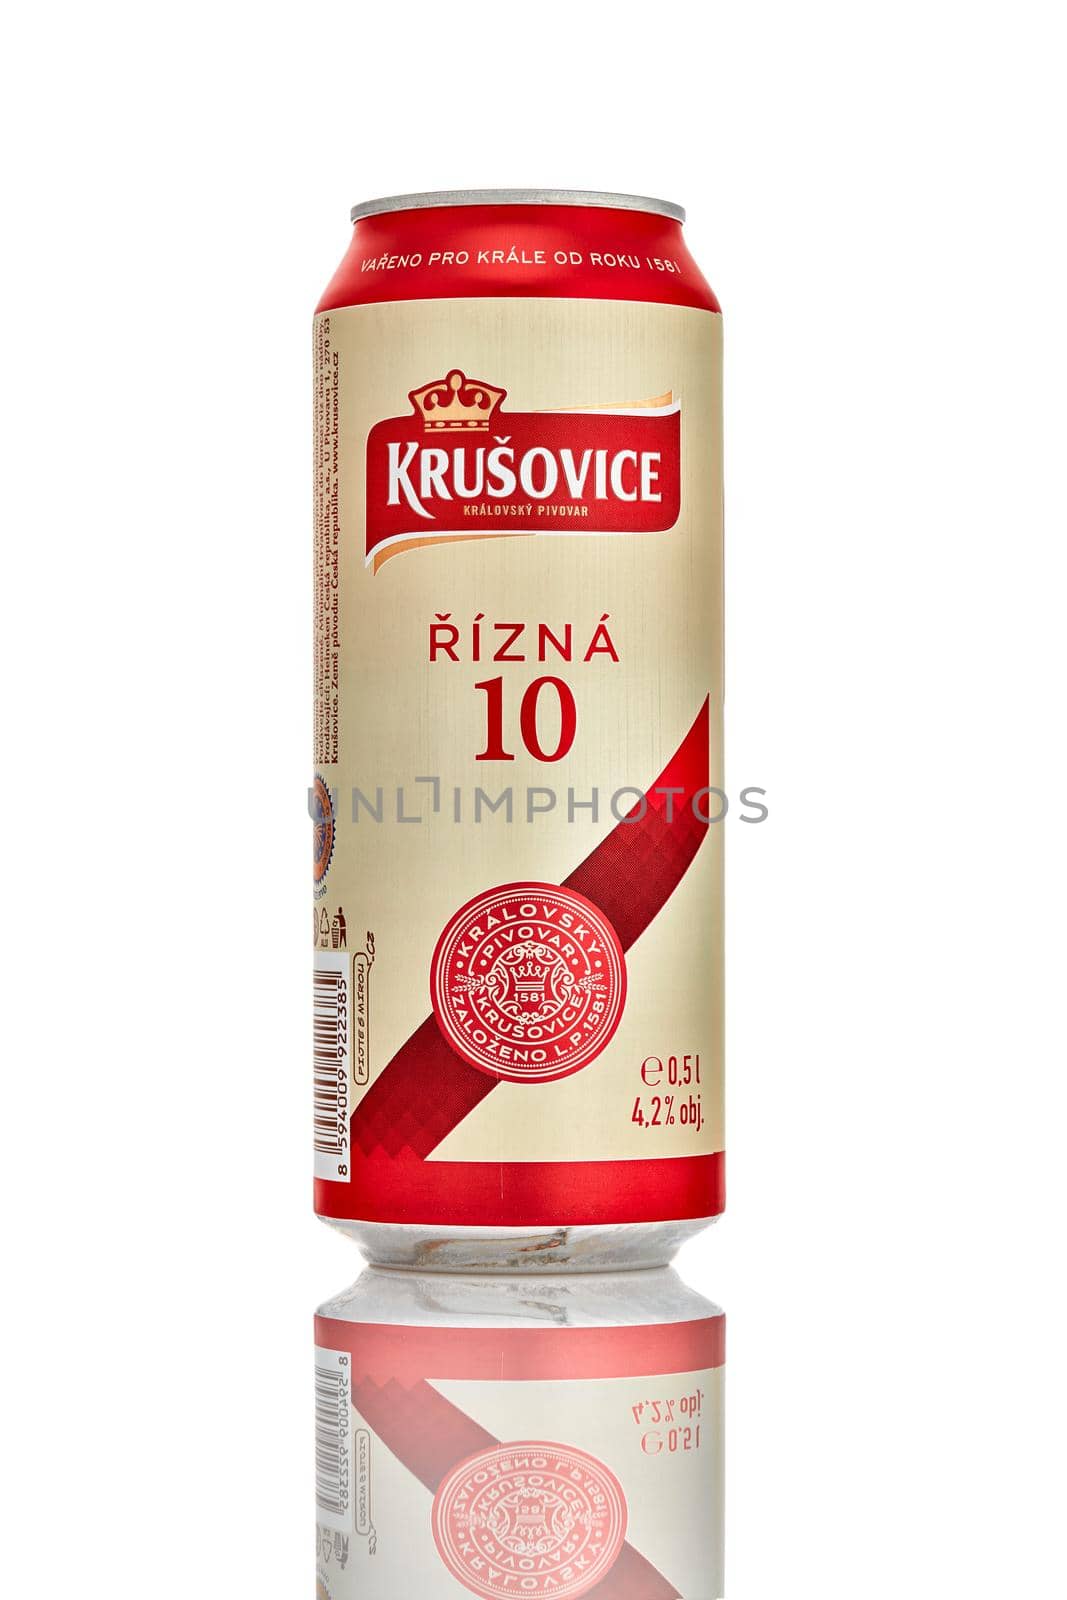 Can of Krusovice Rizna 10 Czech beer white background. Delcious beer from Czechia. 21.06.2019, Rostov-on-Don, Russia.